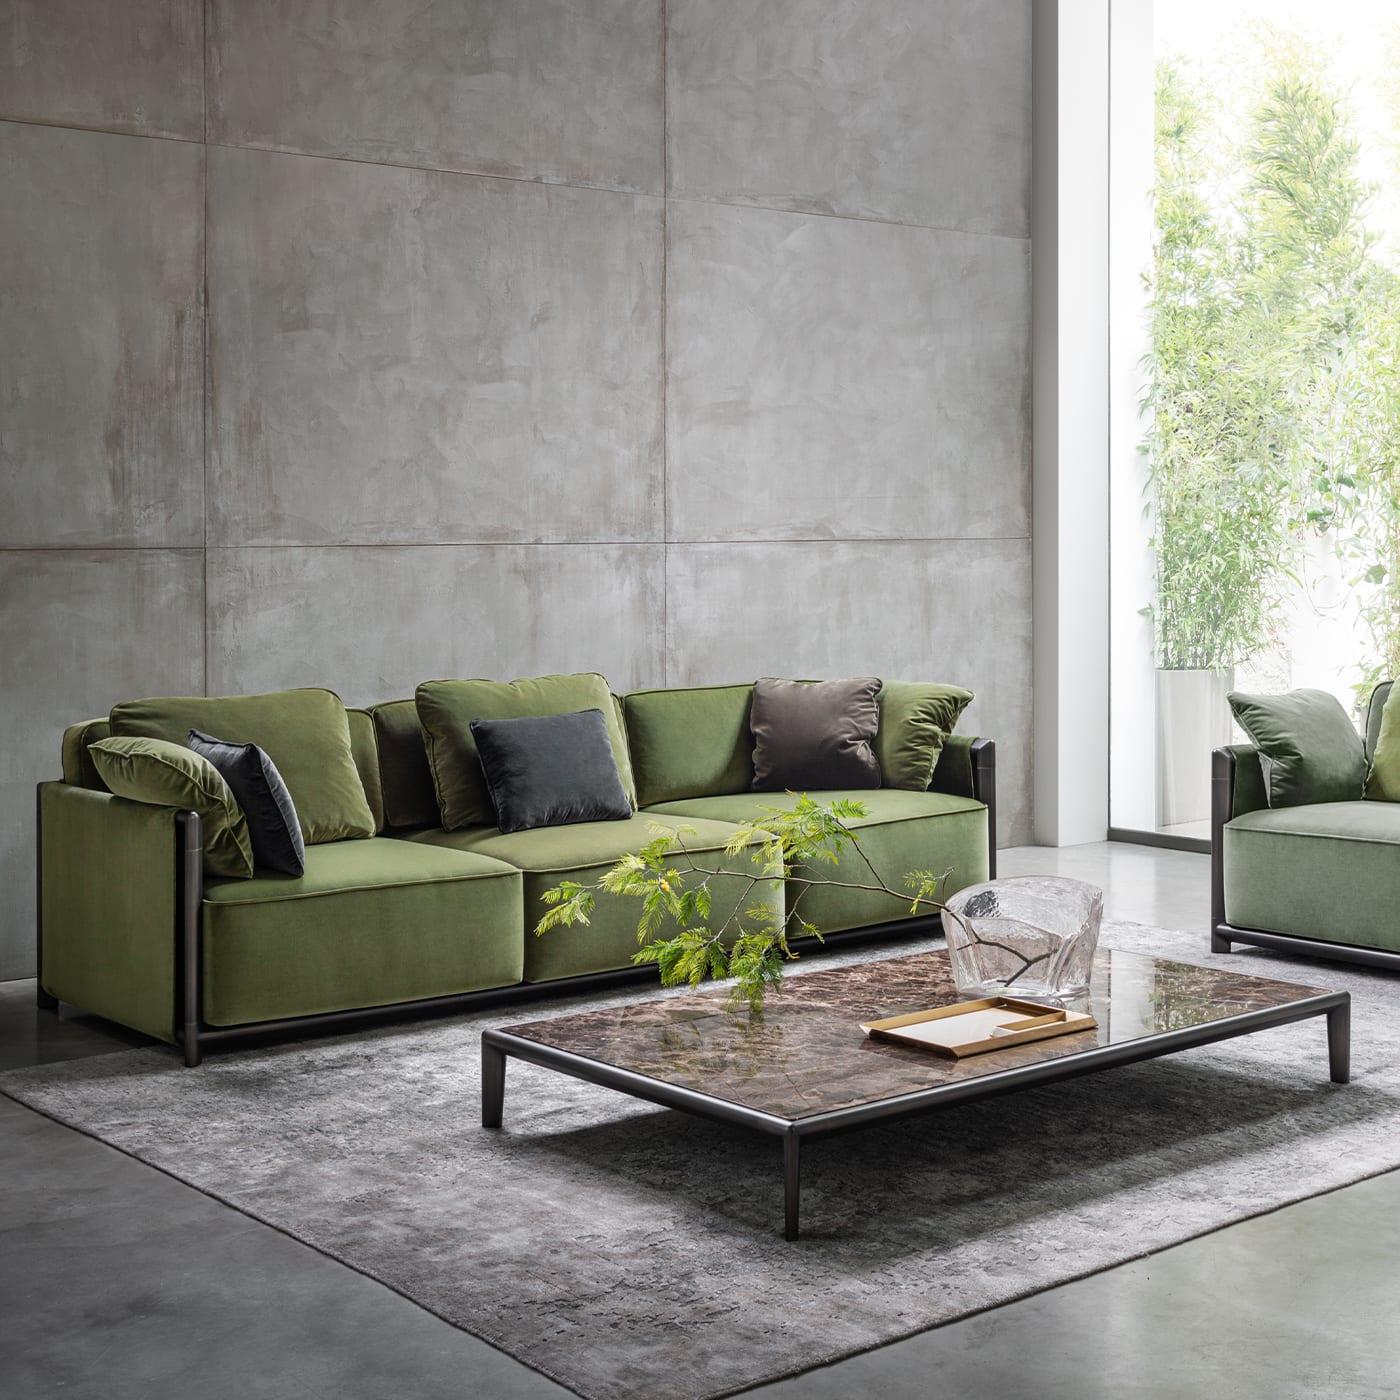 Plush volumes featuring a rich padding and a classy, olive-green fabric upholstery lend this sofa its pampering feel still not compromising on elegance. Also offered in other color options to best fit in any color palette, it invites you to enjoy